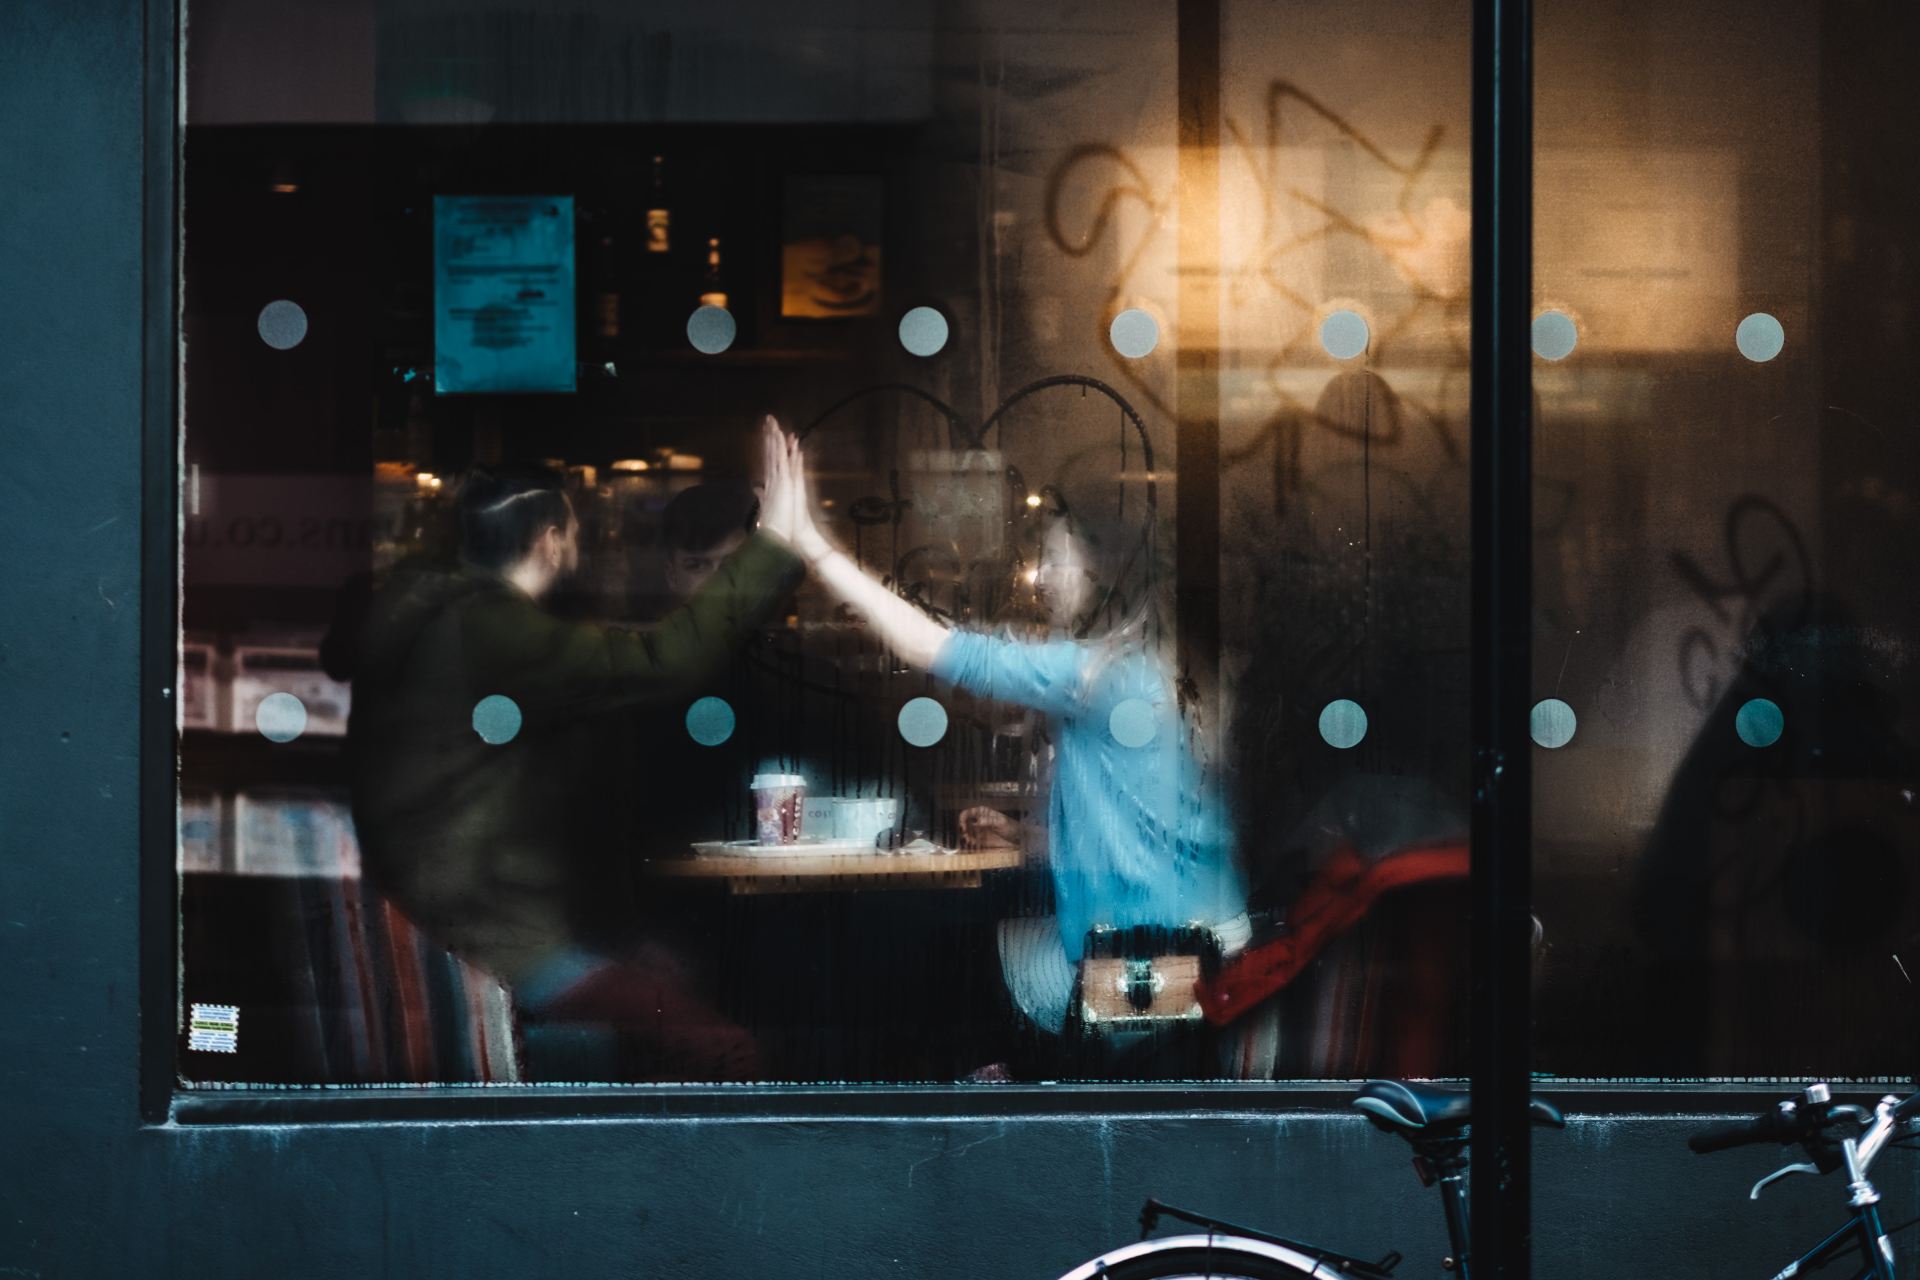 man and woman clapping each other hands inside the cafe